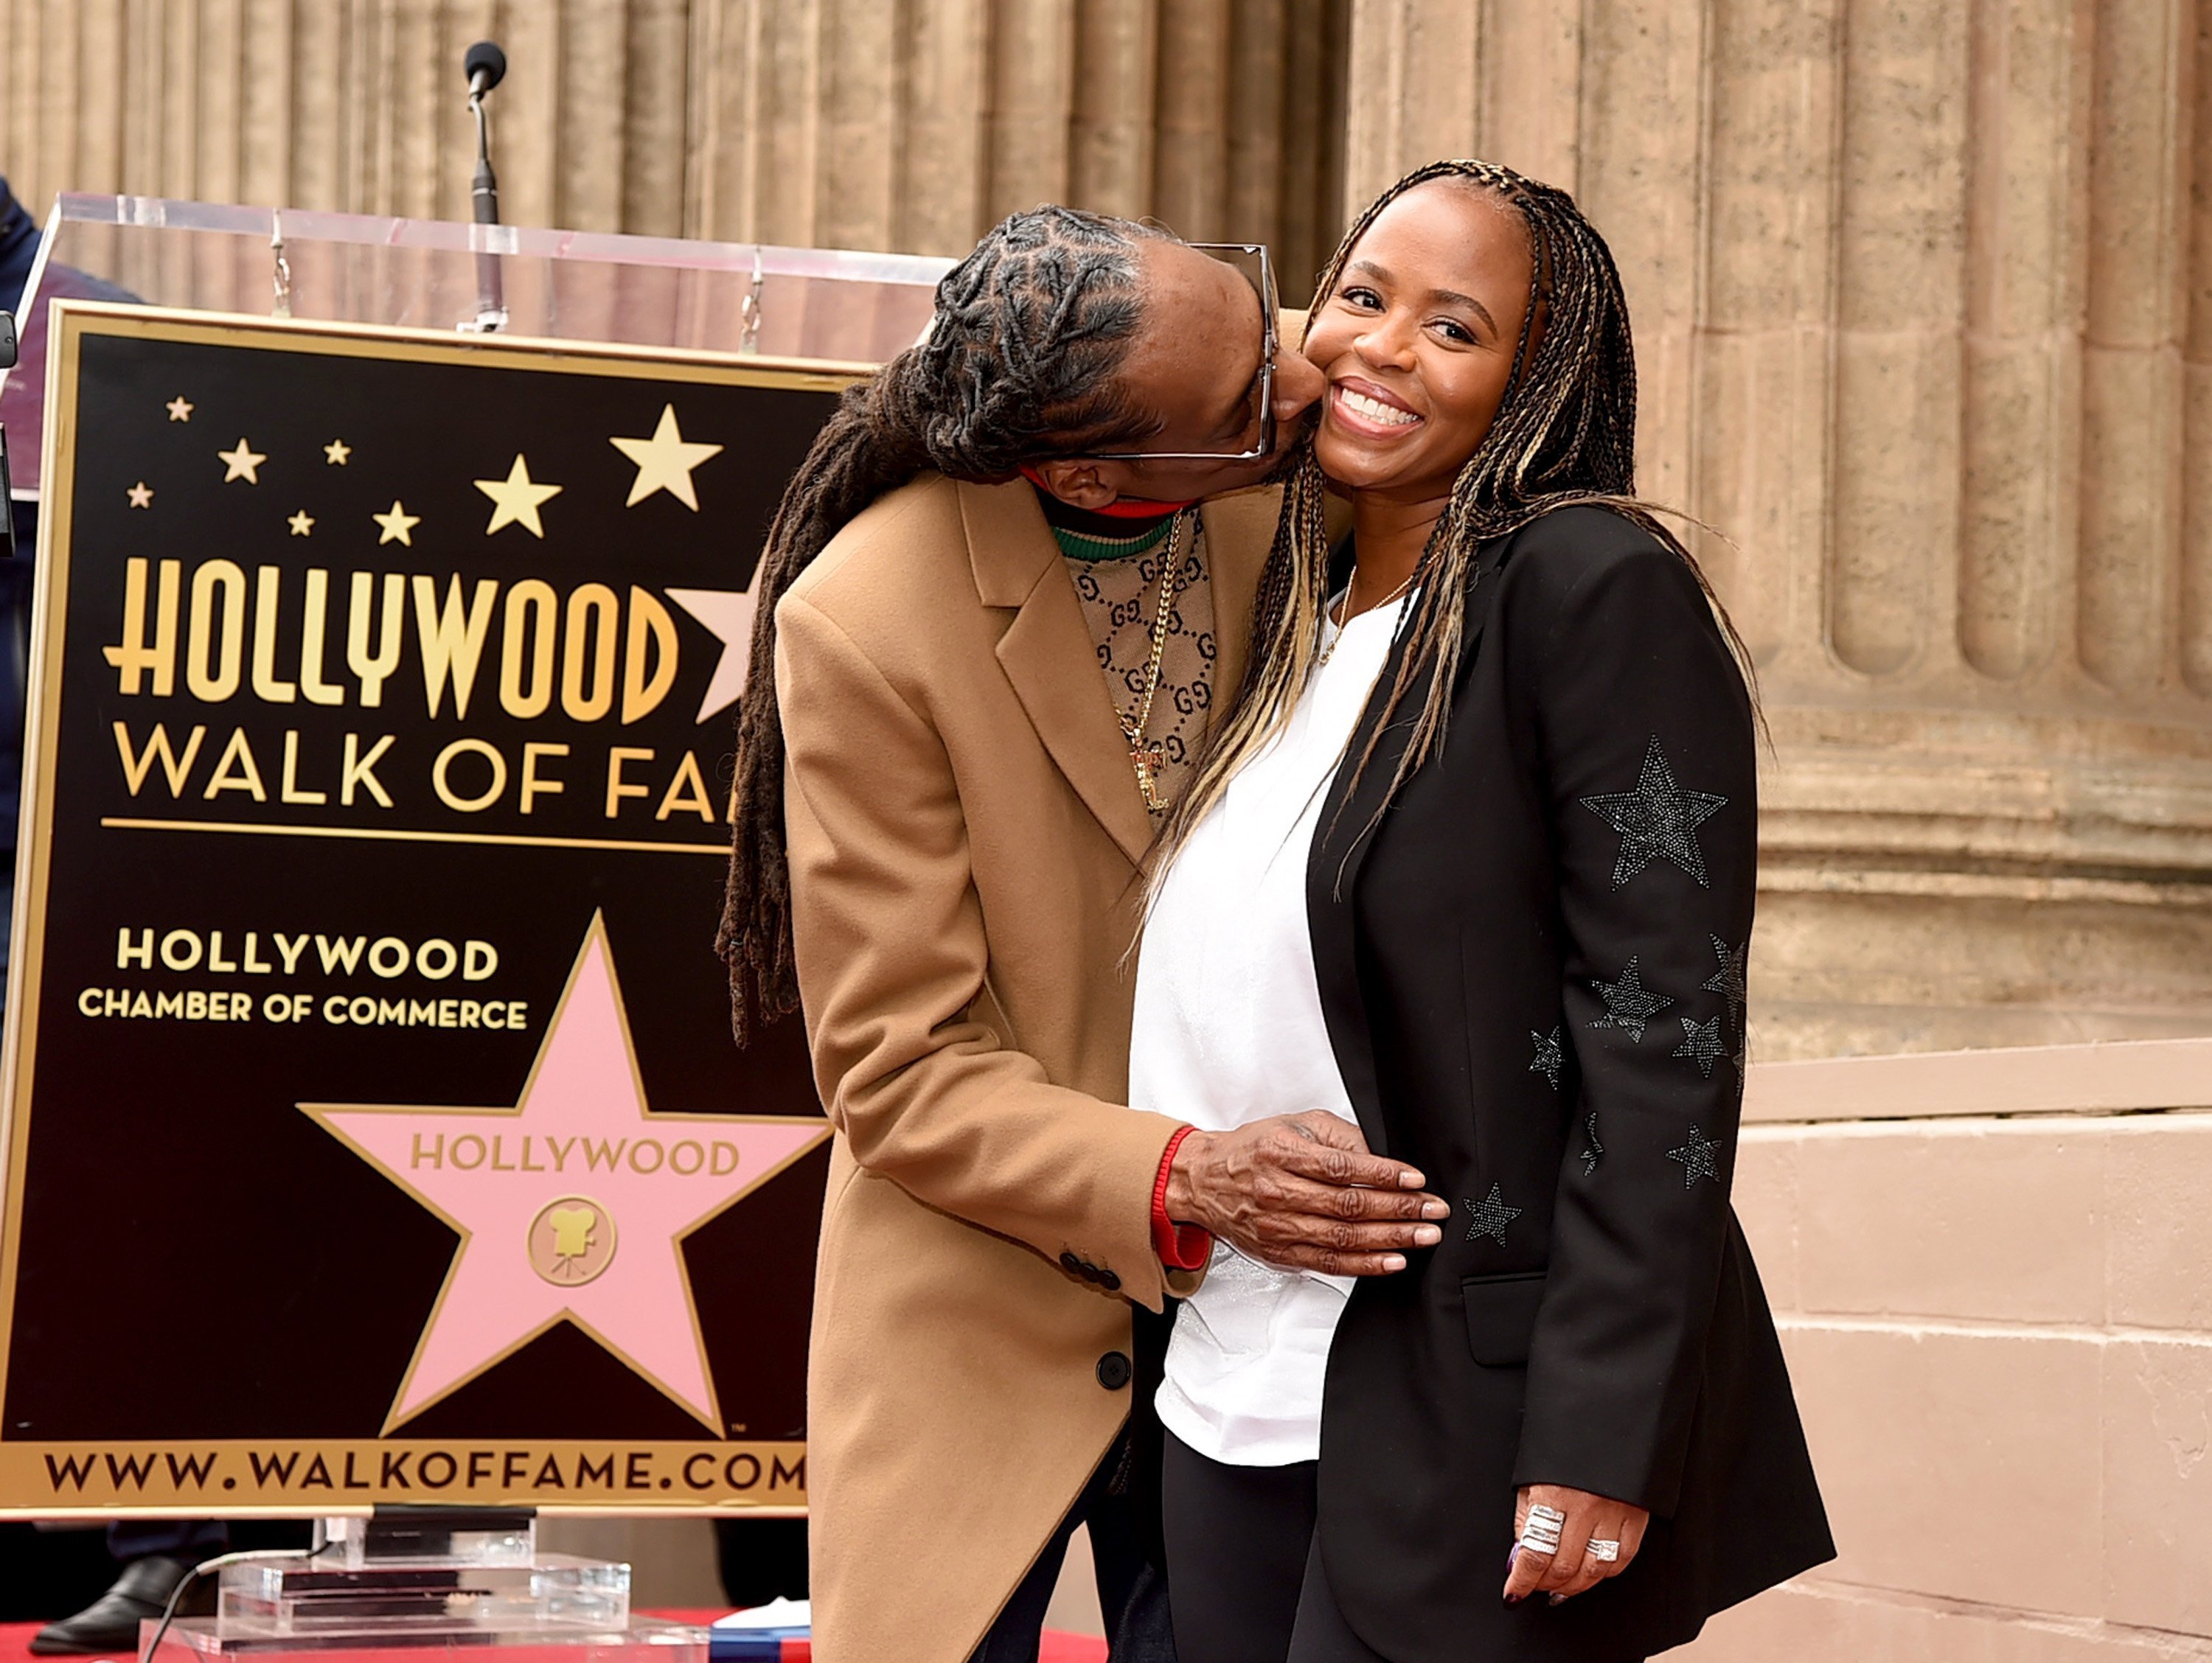 Snoop Dogg, with his wife Shante Broadus, when he was honored with a star on The Hollywood Walk Of Fame in November 2018. | Photo: Getty Images